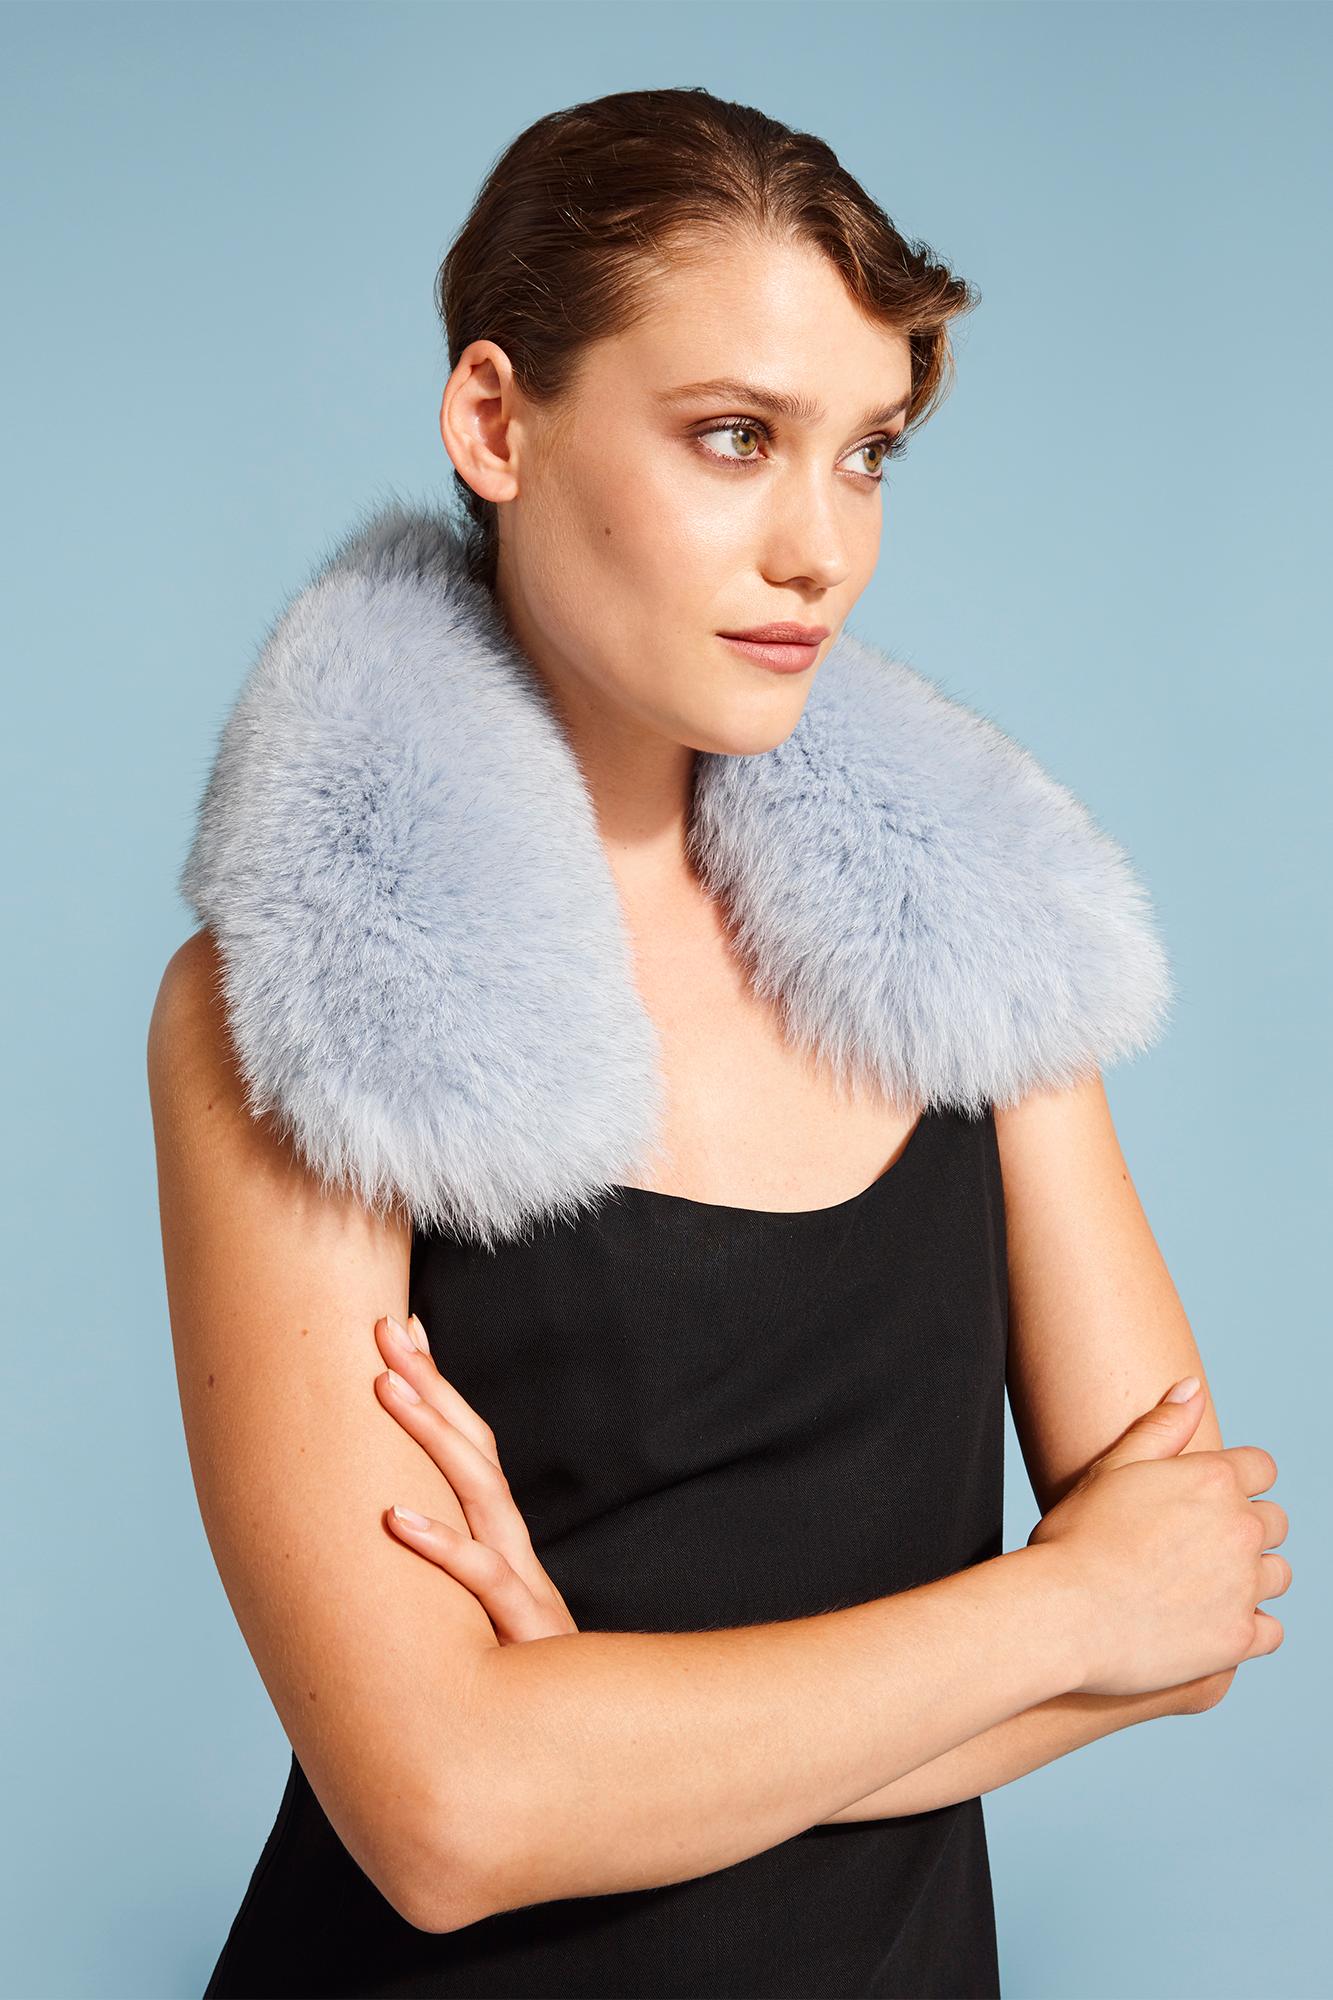 Verheyen London Peter Pan Collar in Iced Blue Fox Fur & lined in silk  

The perfect Christmas gift which can be personally monogrammed on request.  The Peter Pan collar is Verheyen London’s classic staple for effortless style for casual wear.

To